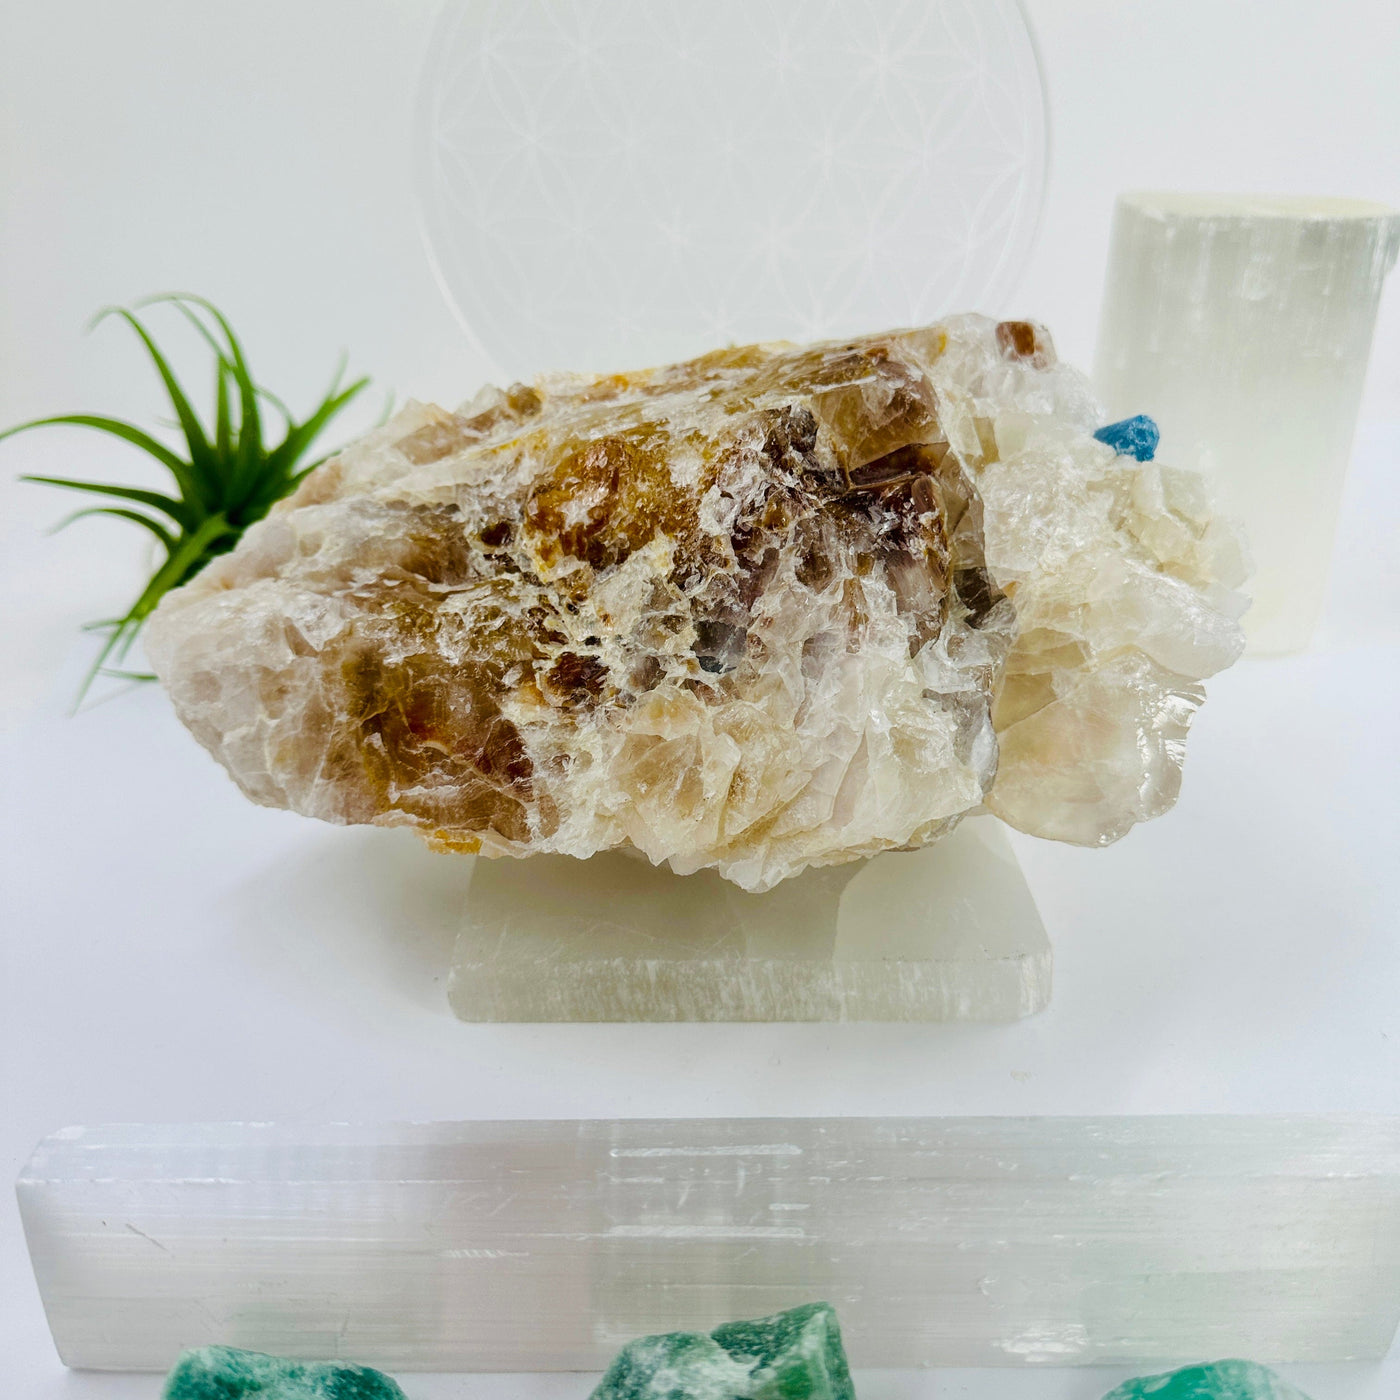 Aquamarine in matrix - aquamarine crystal embedded in large natural rough stone side view